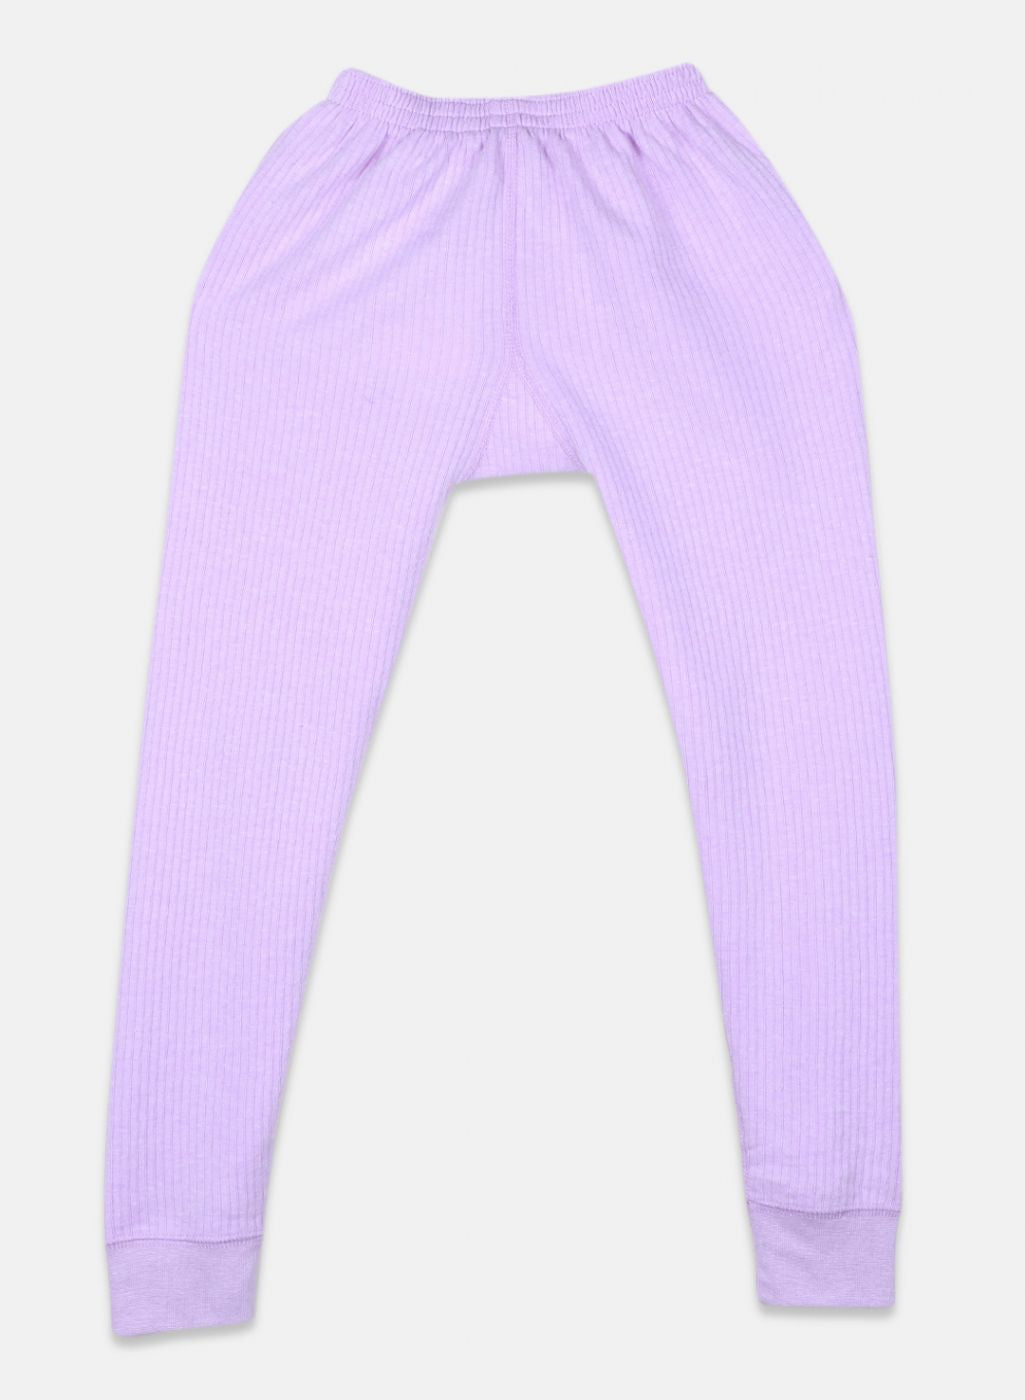 Boys Purple Solid Thermal Lower